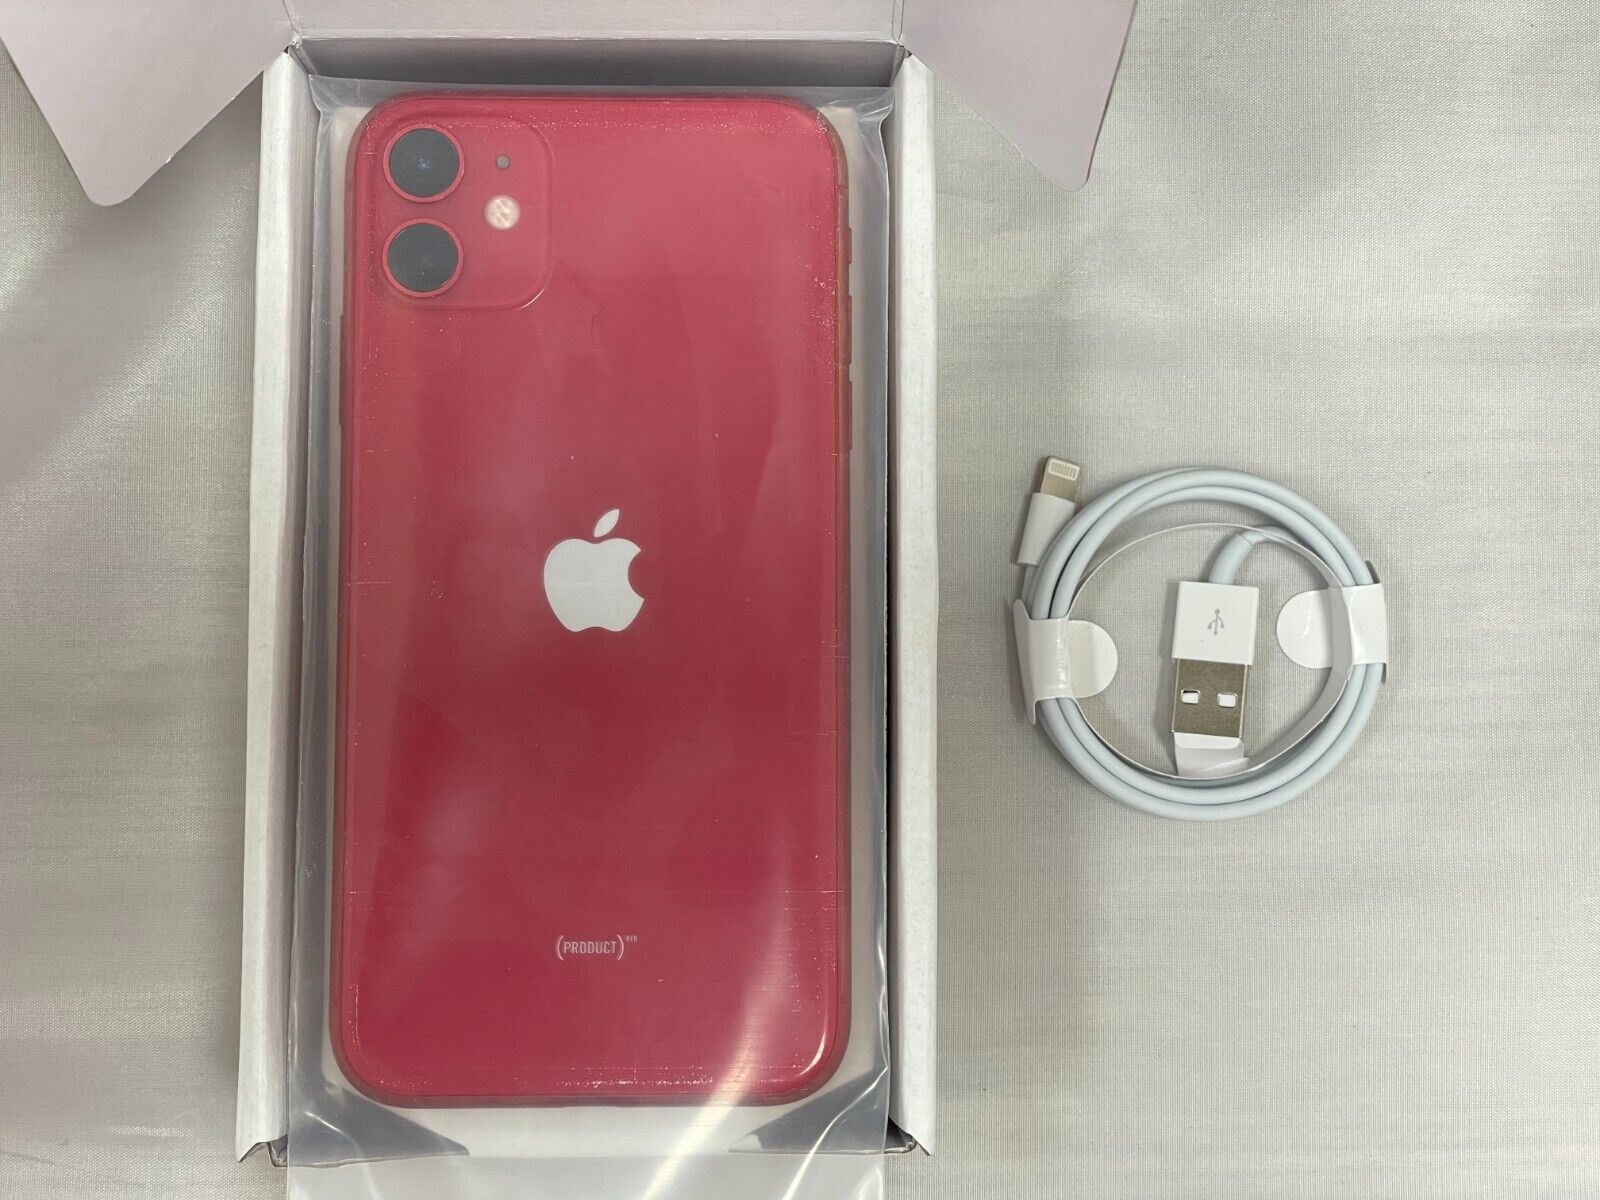 fajance Paradis hovedpine Apple iPhone 11 64GB - (Product)Red - Unlocked Fully Functional - Fair  Condition | eBay